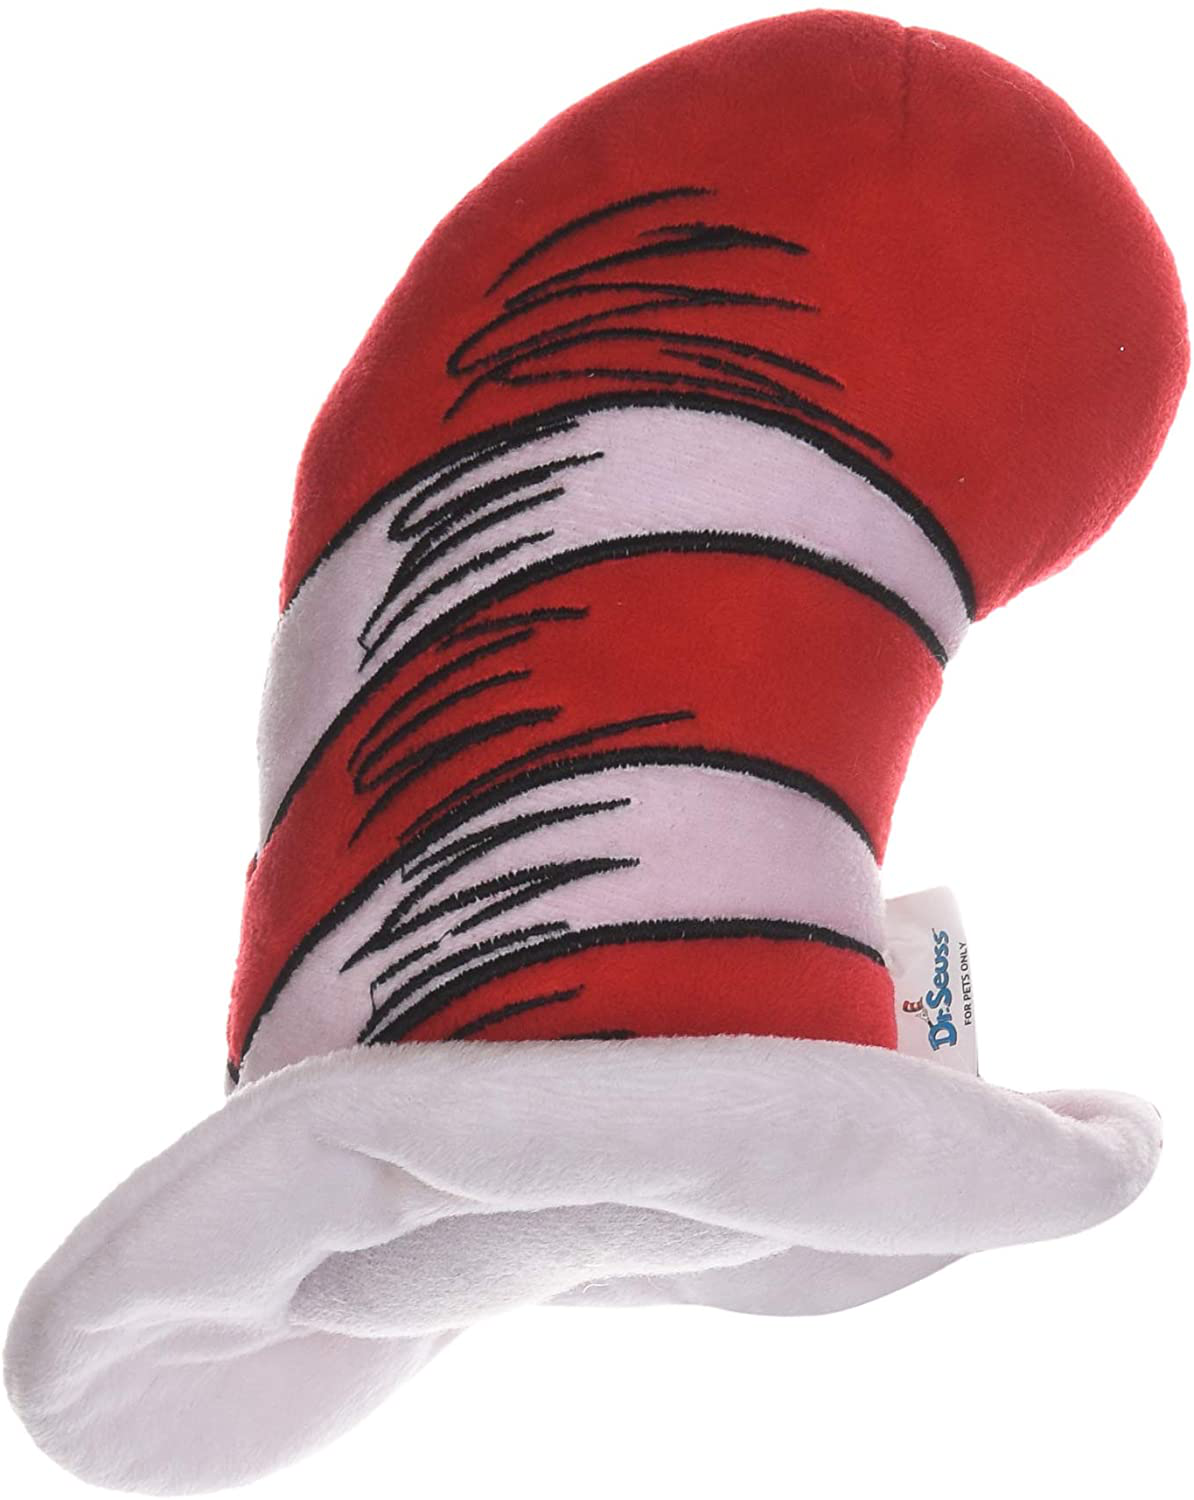 Dr. Seuss the Cat in the Hat Plush Dog Toys - Dog Toy for All Sized Dogs, the Cat in the Hat -Stuffed Animal Dog Toy from Dr. Seuss Collection Available in Multiple Styles